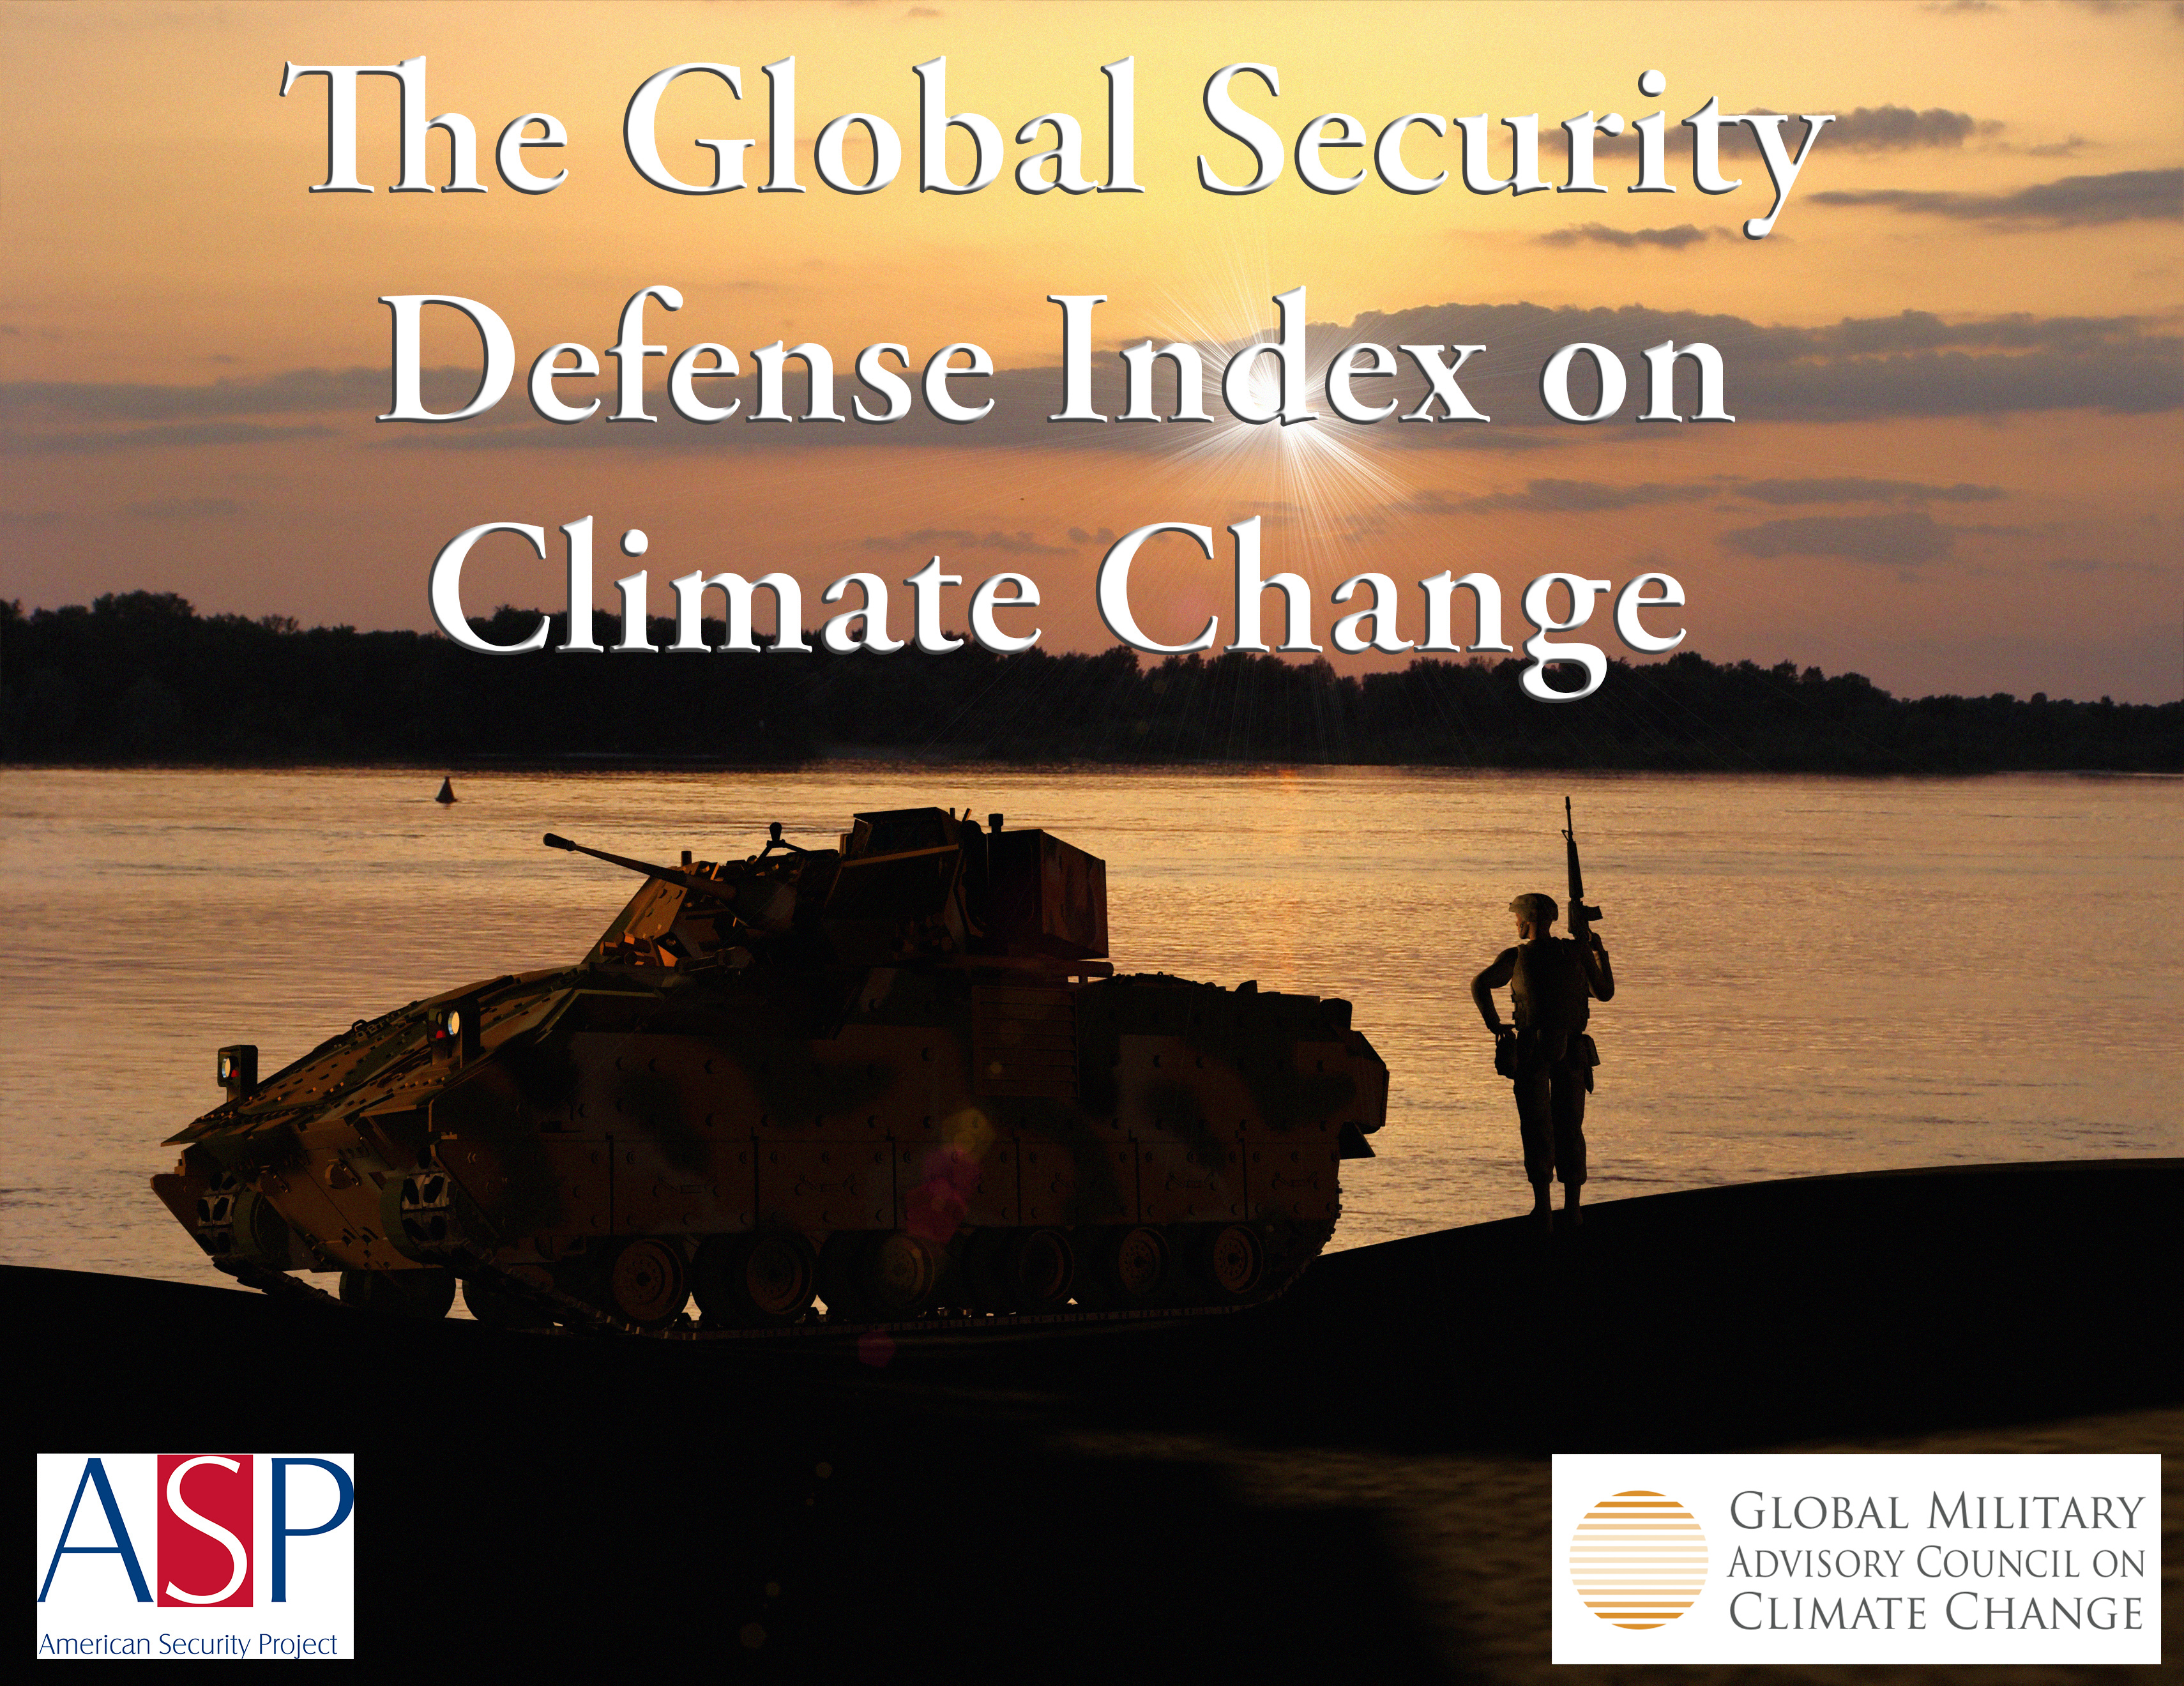 The Global Security Defense Index on Climate Change: Preliminary Results